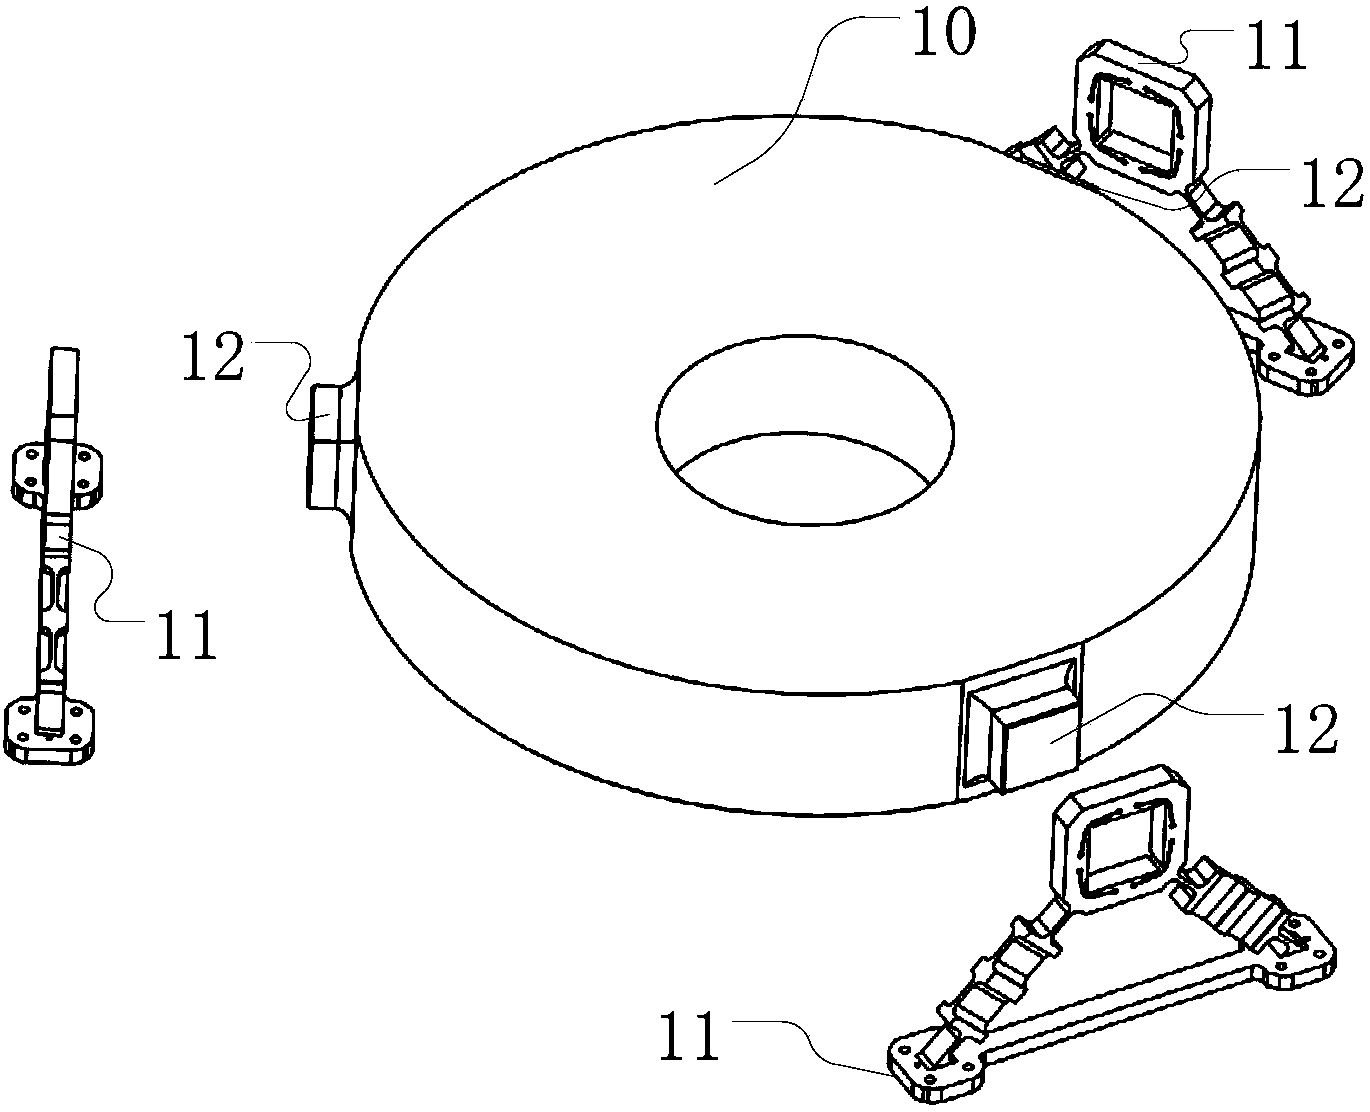 Lateral flexible supporting structure of space optical remote sensor circulator reflector